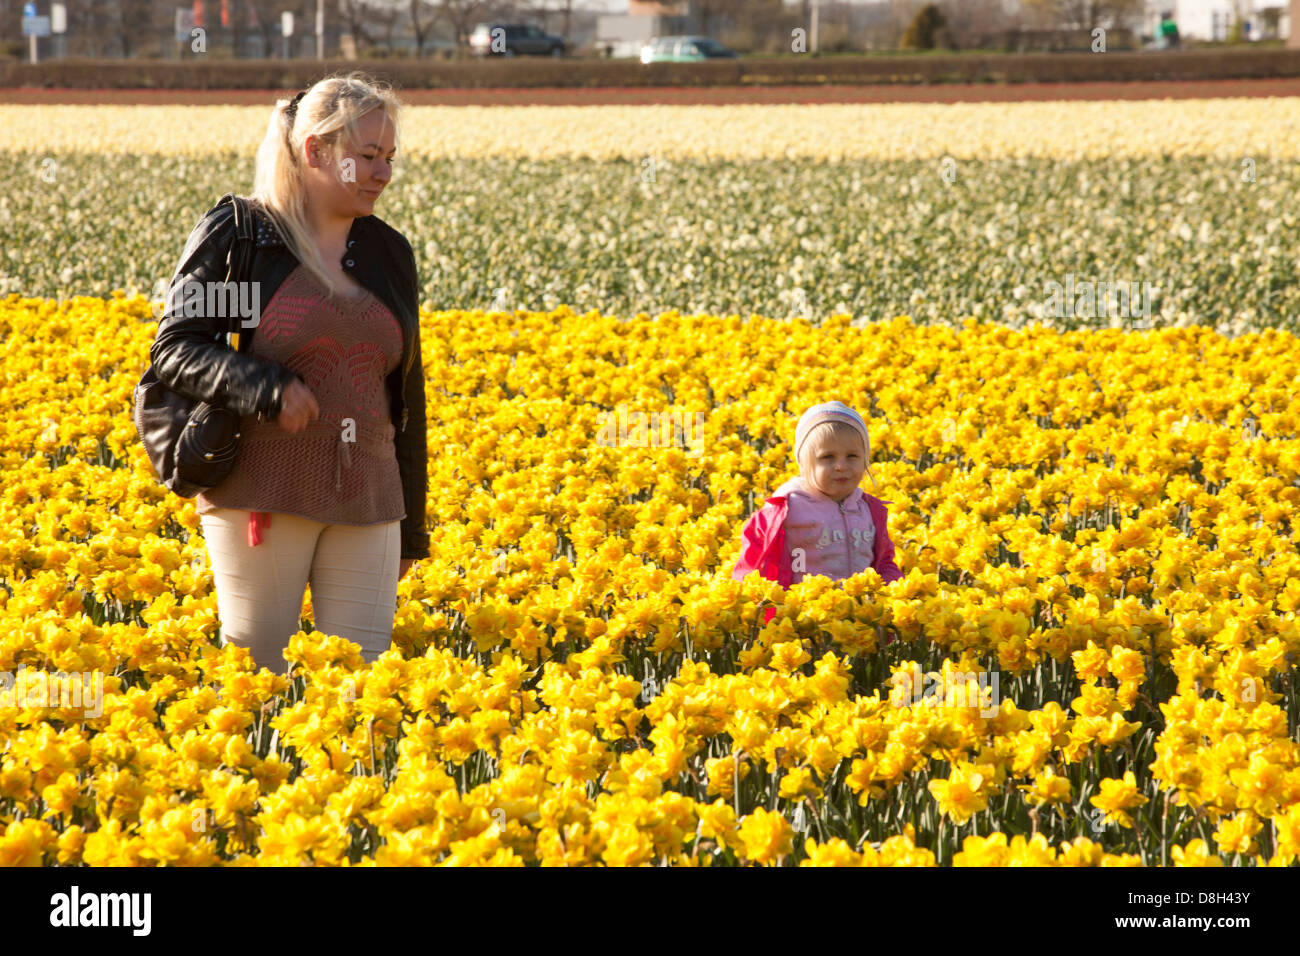 A mother and child in Daffodil fields near Keukenhof gardens, Lisse, Netherlands. Stock Photo